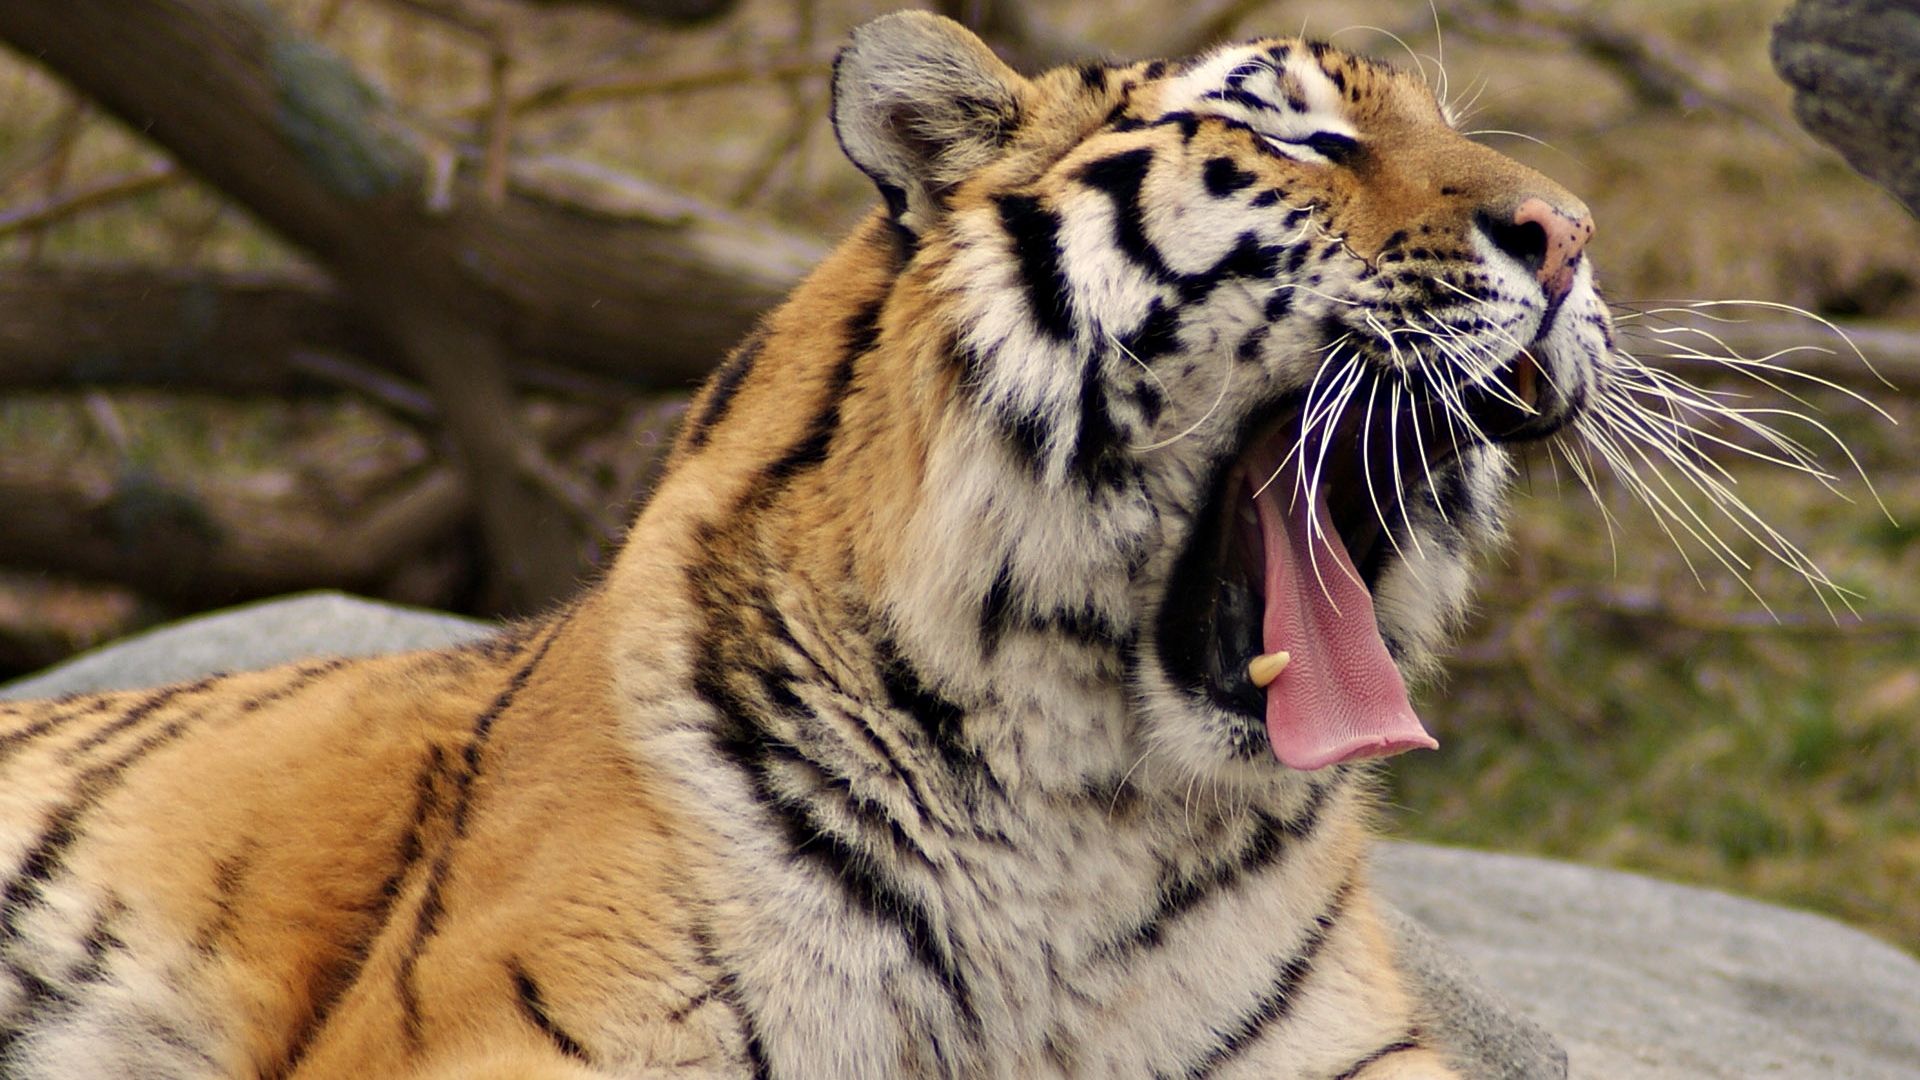 The tiger is yawning, Wallpaper and Background